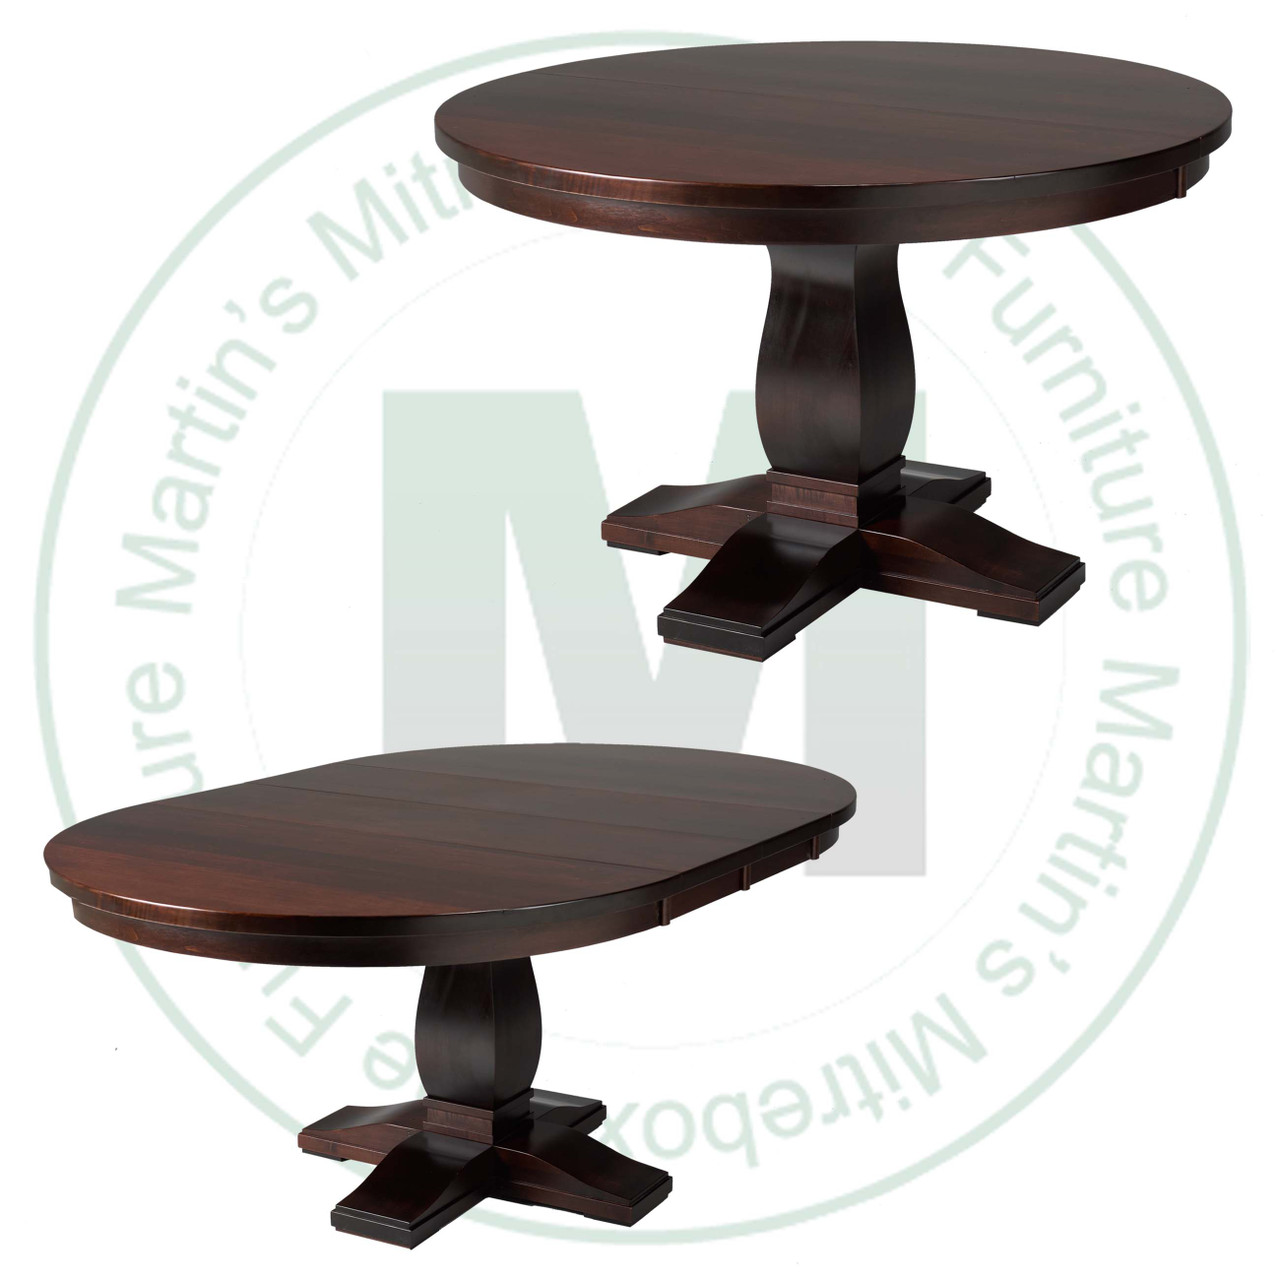 Maple Valencia Single Pedestal Table 54''D x 54''W x 30''H With 2 - 12'' Leaves Table. Table Has 1'' Thick Top.